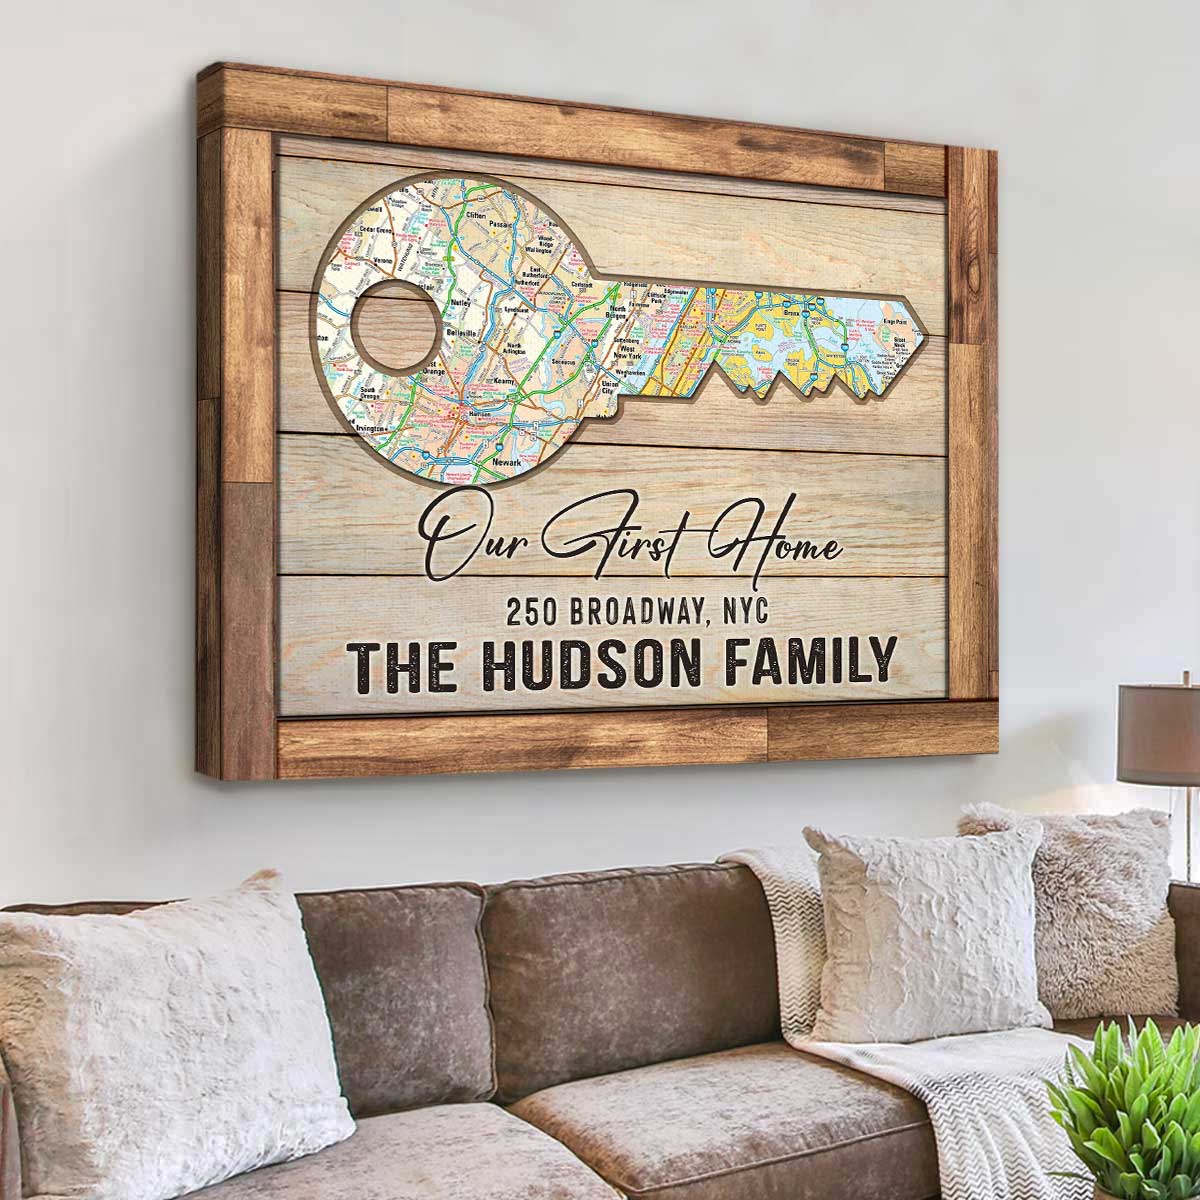 https://benicee.com/wp-content/uploads/2022/09/New-Home-Key-Map-Wall-Art-Christmas-Gifts-For-New-Homeowners-New-Home-Gift-Ideas-4.jpg